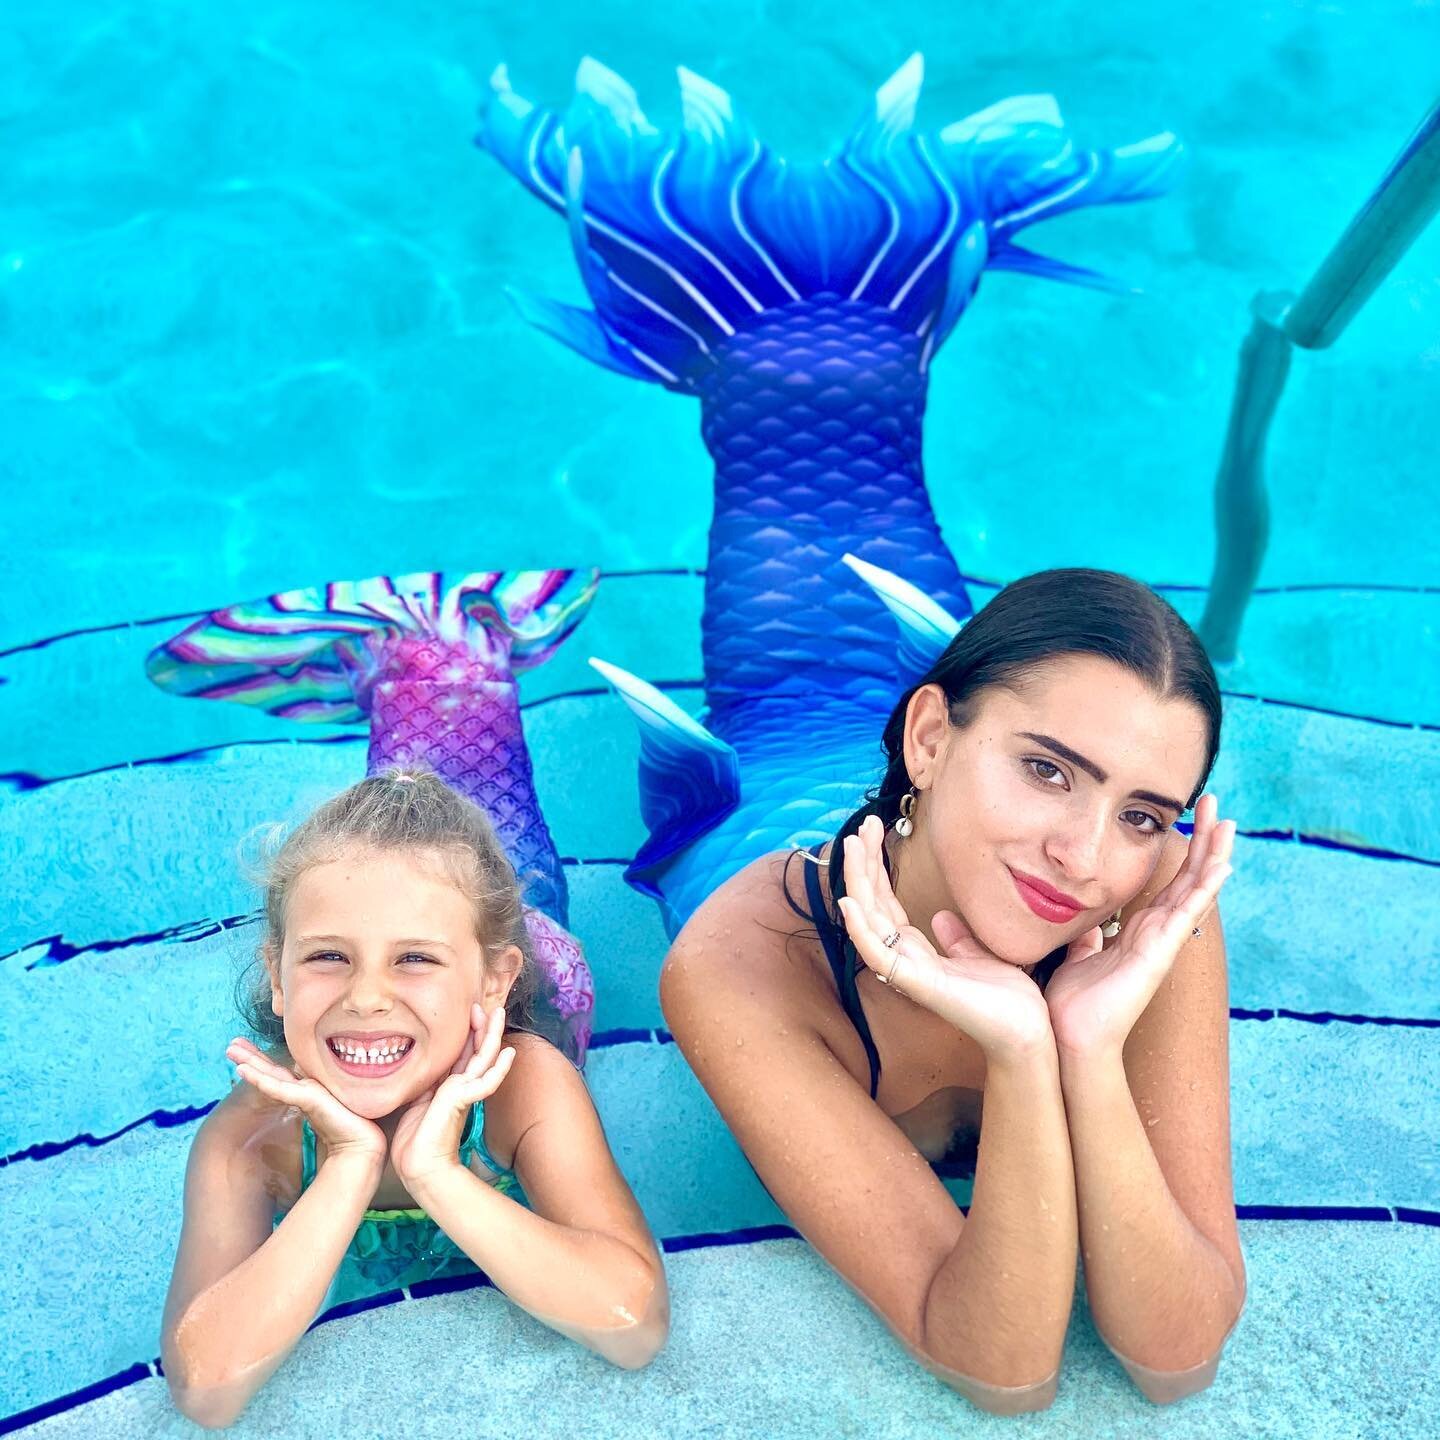 Oh wait, did someone say &ldquo;I saw two mermaids&rdquo; 🙈😬
Swim Haven is so proud to announce: YESSSSSS, now you can fulfill your/your child&rsquo;s dream!
Swim with a mermaid!!!!!
More info at www.swimhaven.com/mermaid
.
.
.
.
#swimhaven #mermai